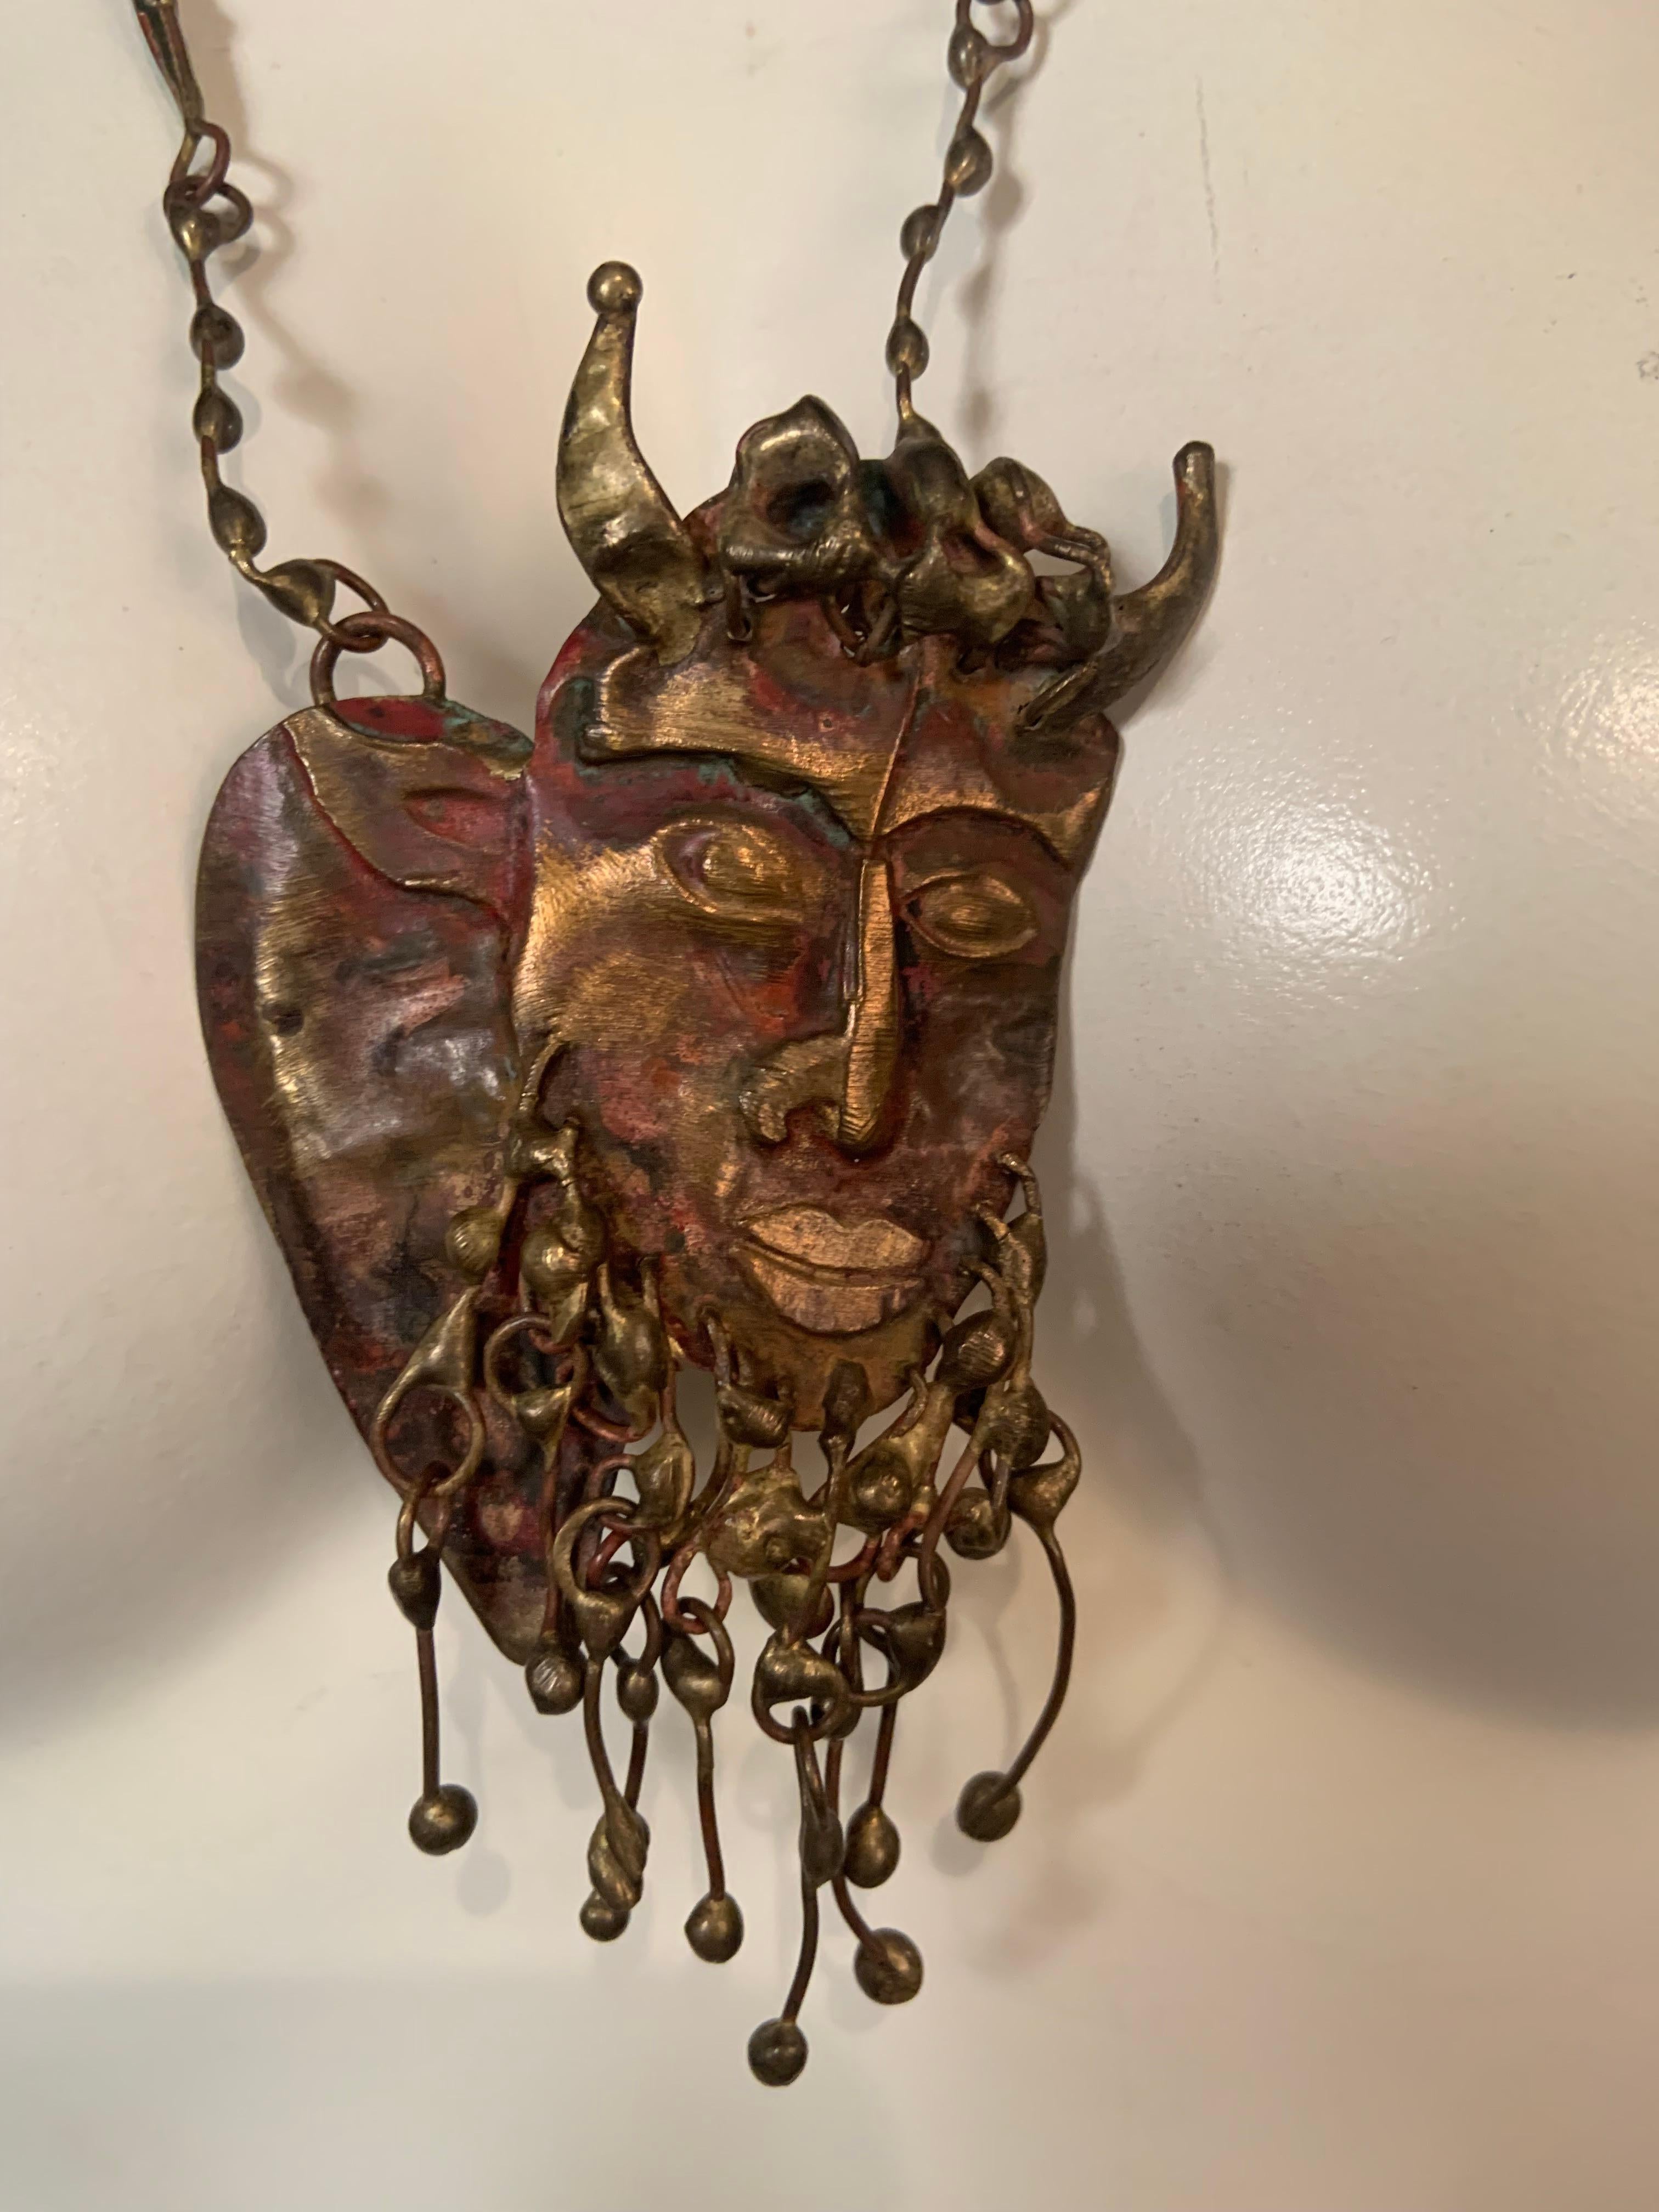 Pal Kepenyes has created a hand made and striking image of a horned Satyr with a kinetic beard rendered in brass and bronze in the Brutalist manner.  It is suspended frpm a hand made chain and it is in excellent condition.  This piece is also from